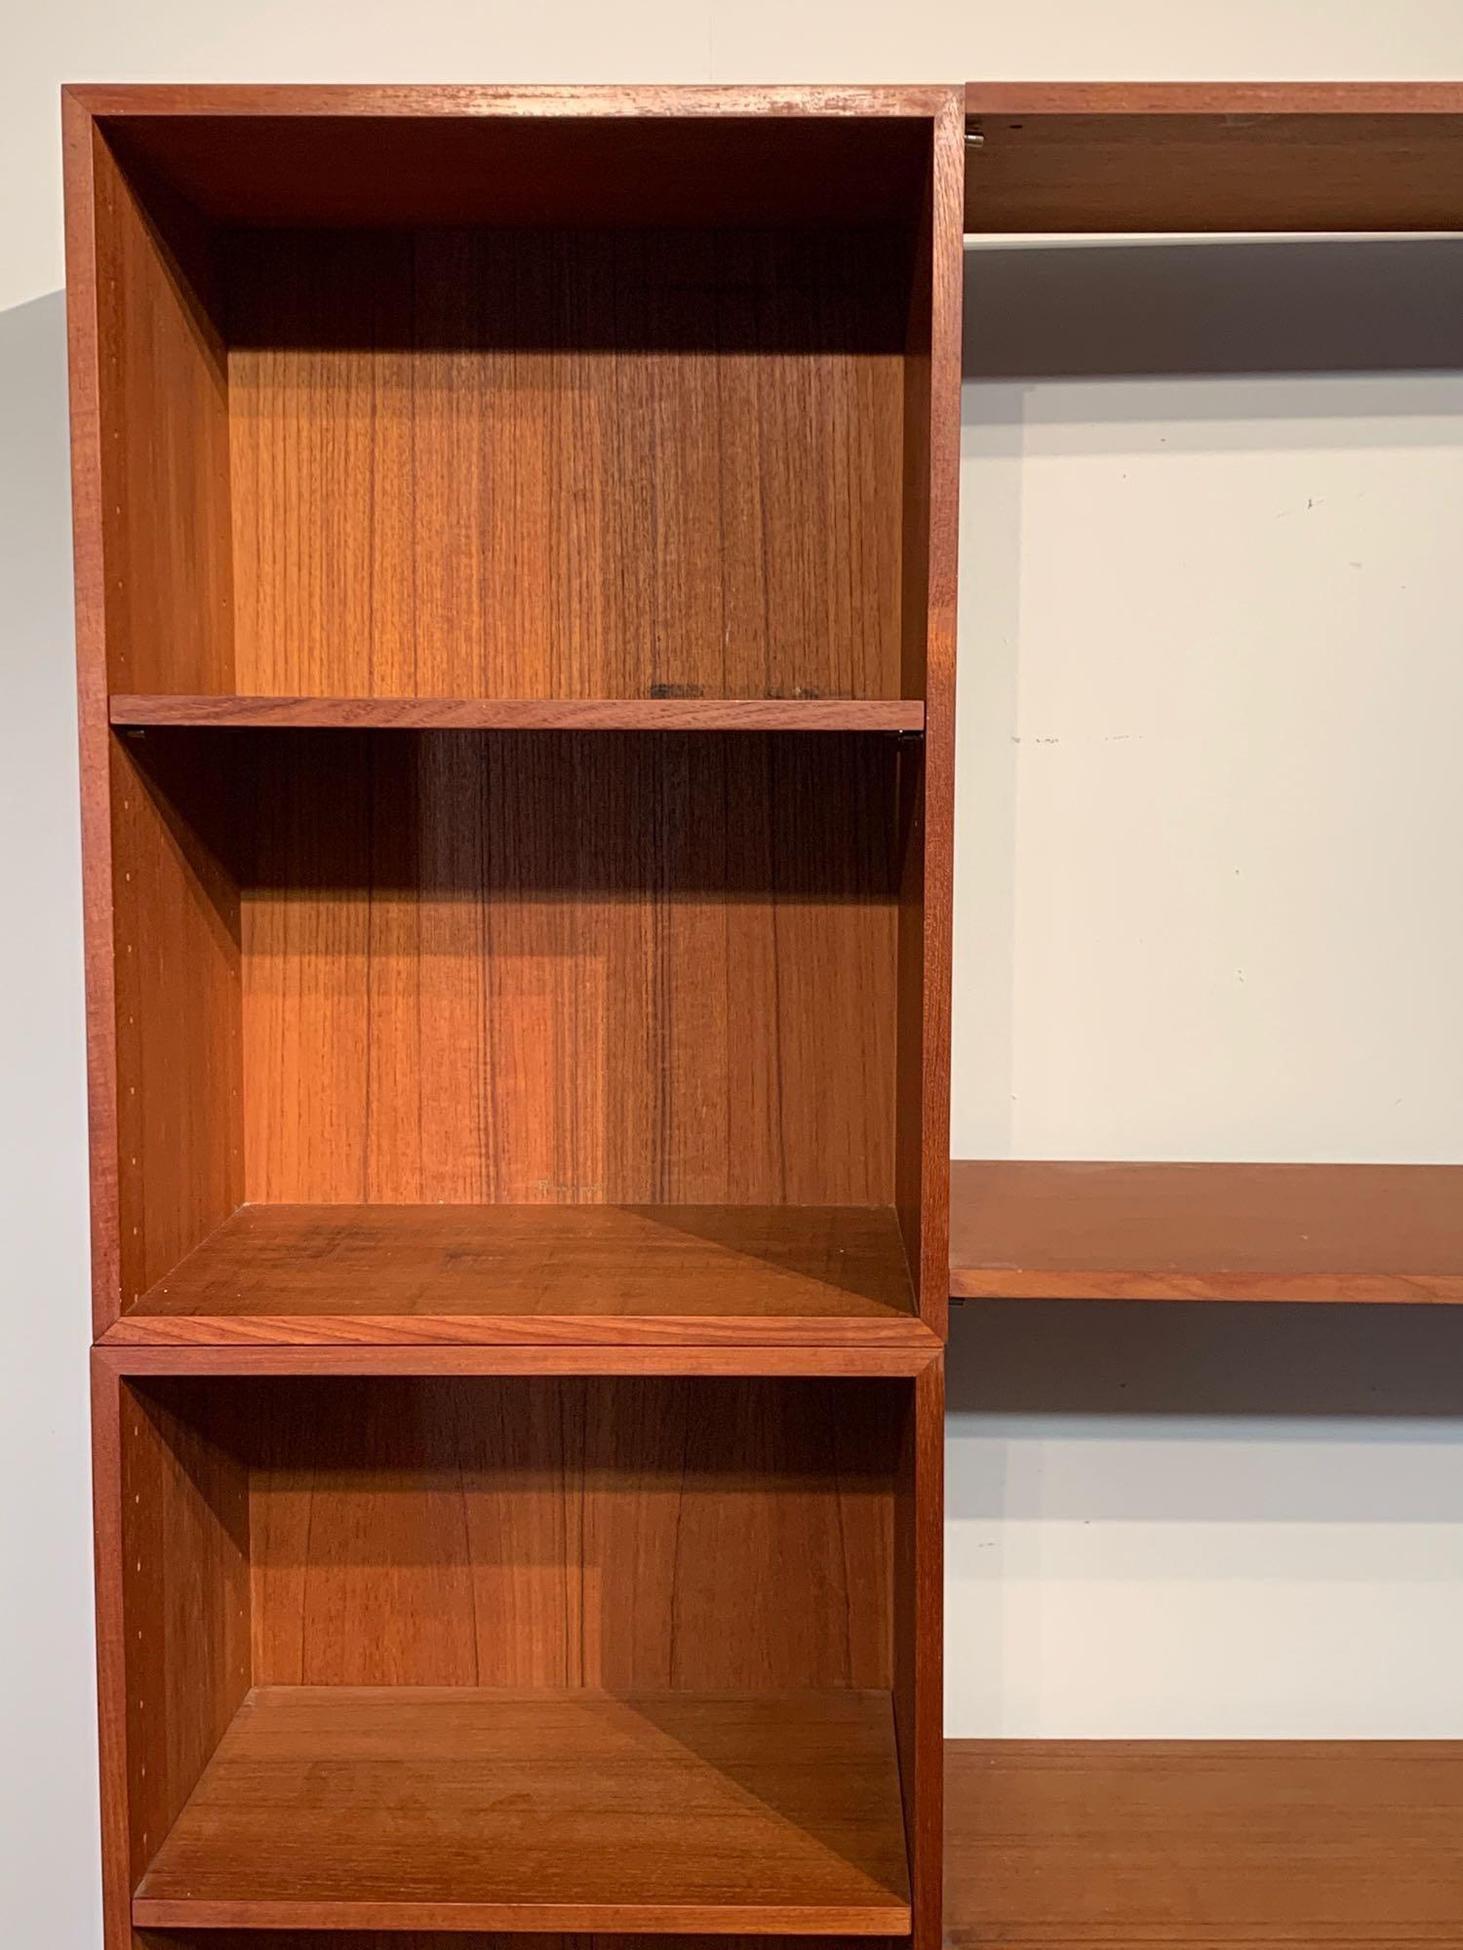 A Finn Juhl Cresco teak wall unit/room divider of two cabinets with doors, four open cabinets with adjustable shelves, and various other shelves. Denmark, France & Sons, with John Stuart medallion and France & Sons mark. Signature Iconic Finn Juhl